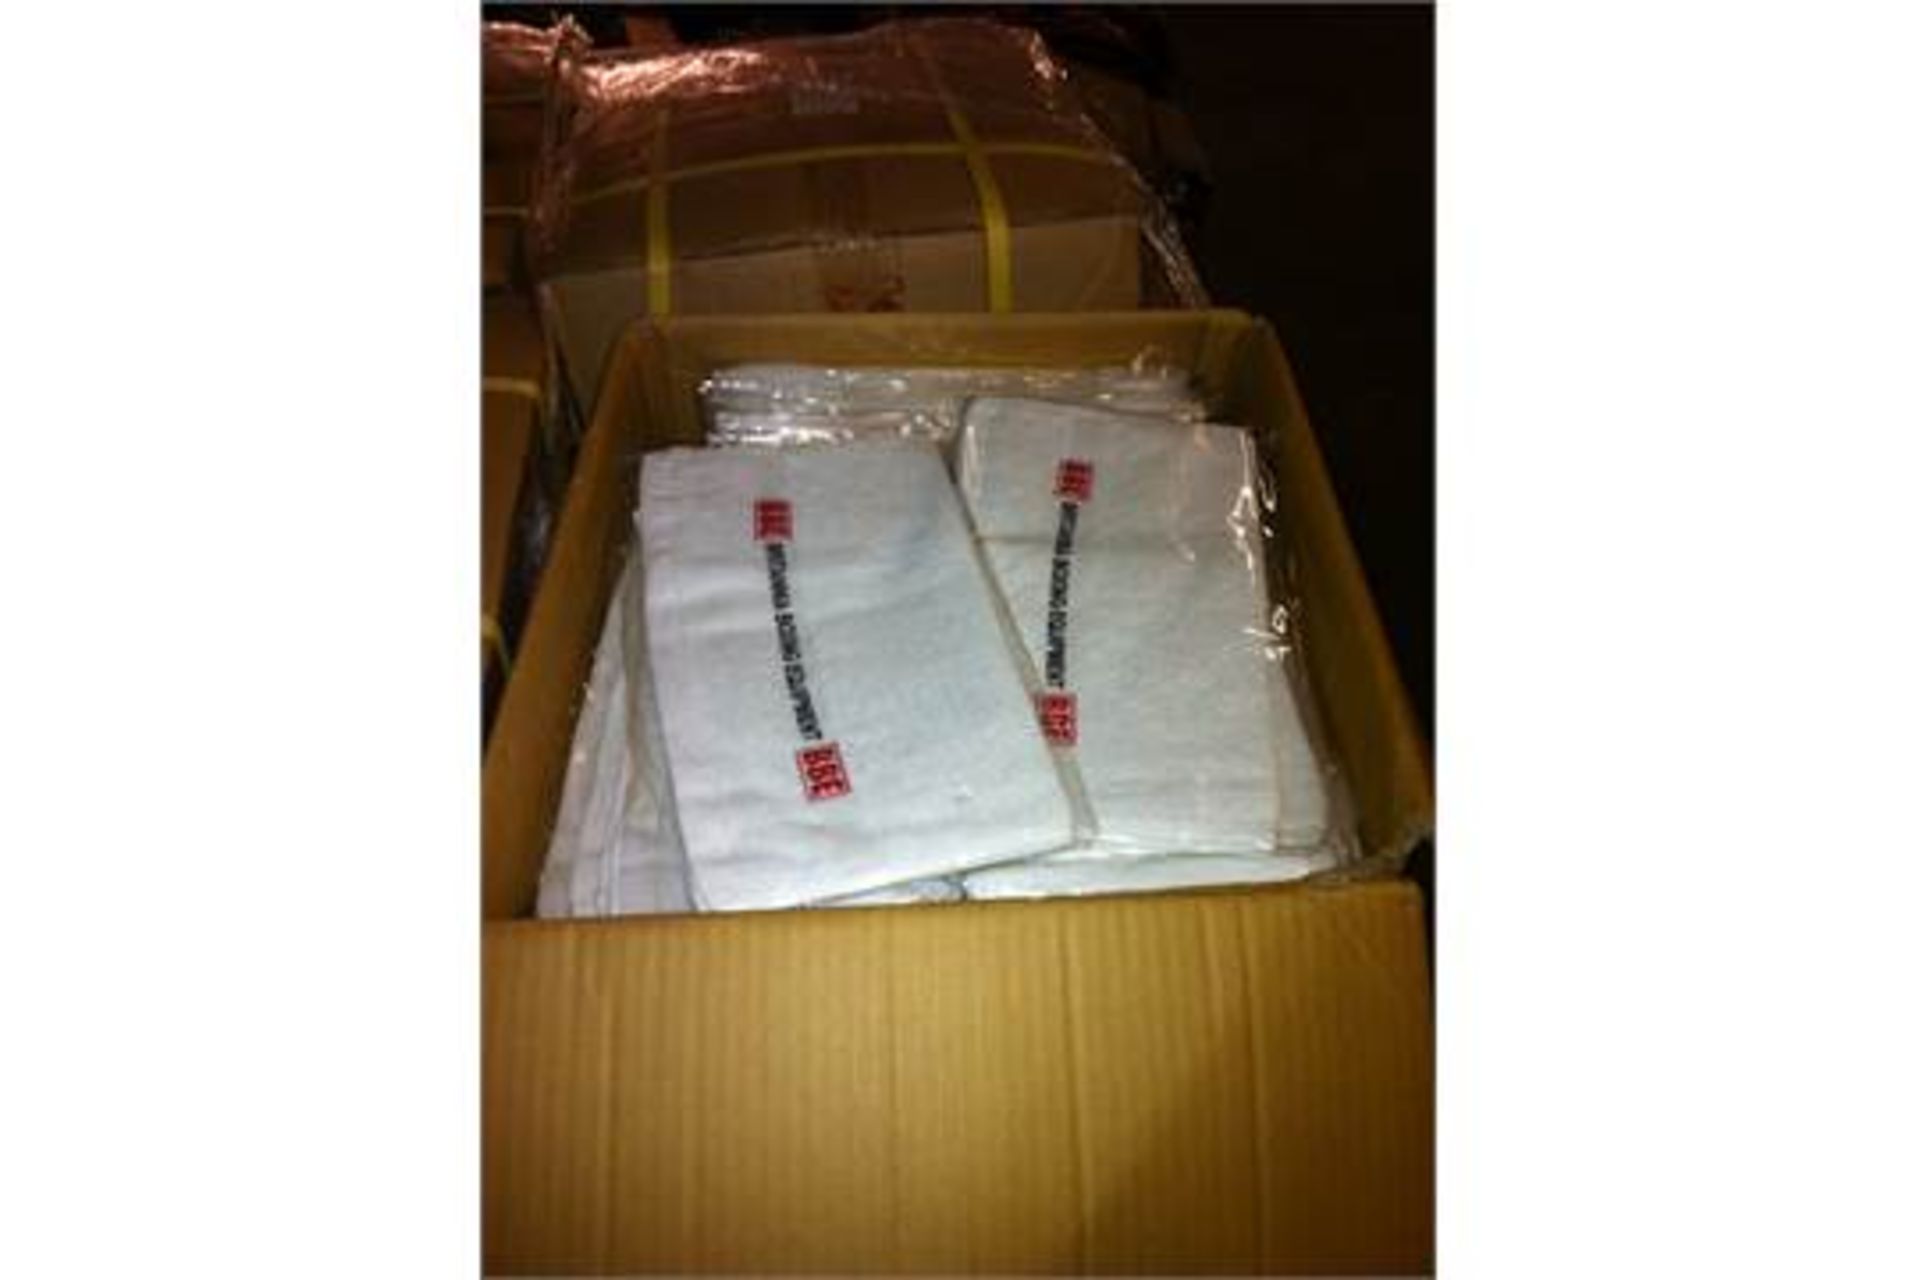 2 x Boxes of BBE Boxing Towels - 7 packs - 12 per pack